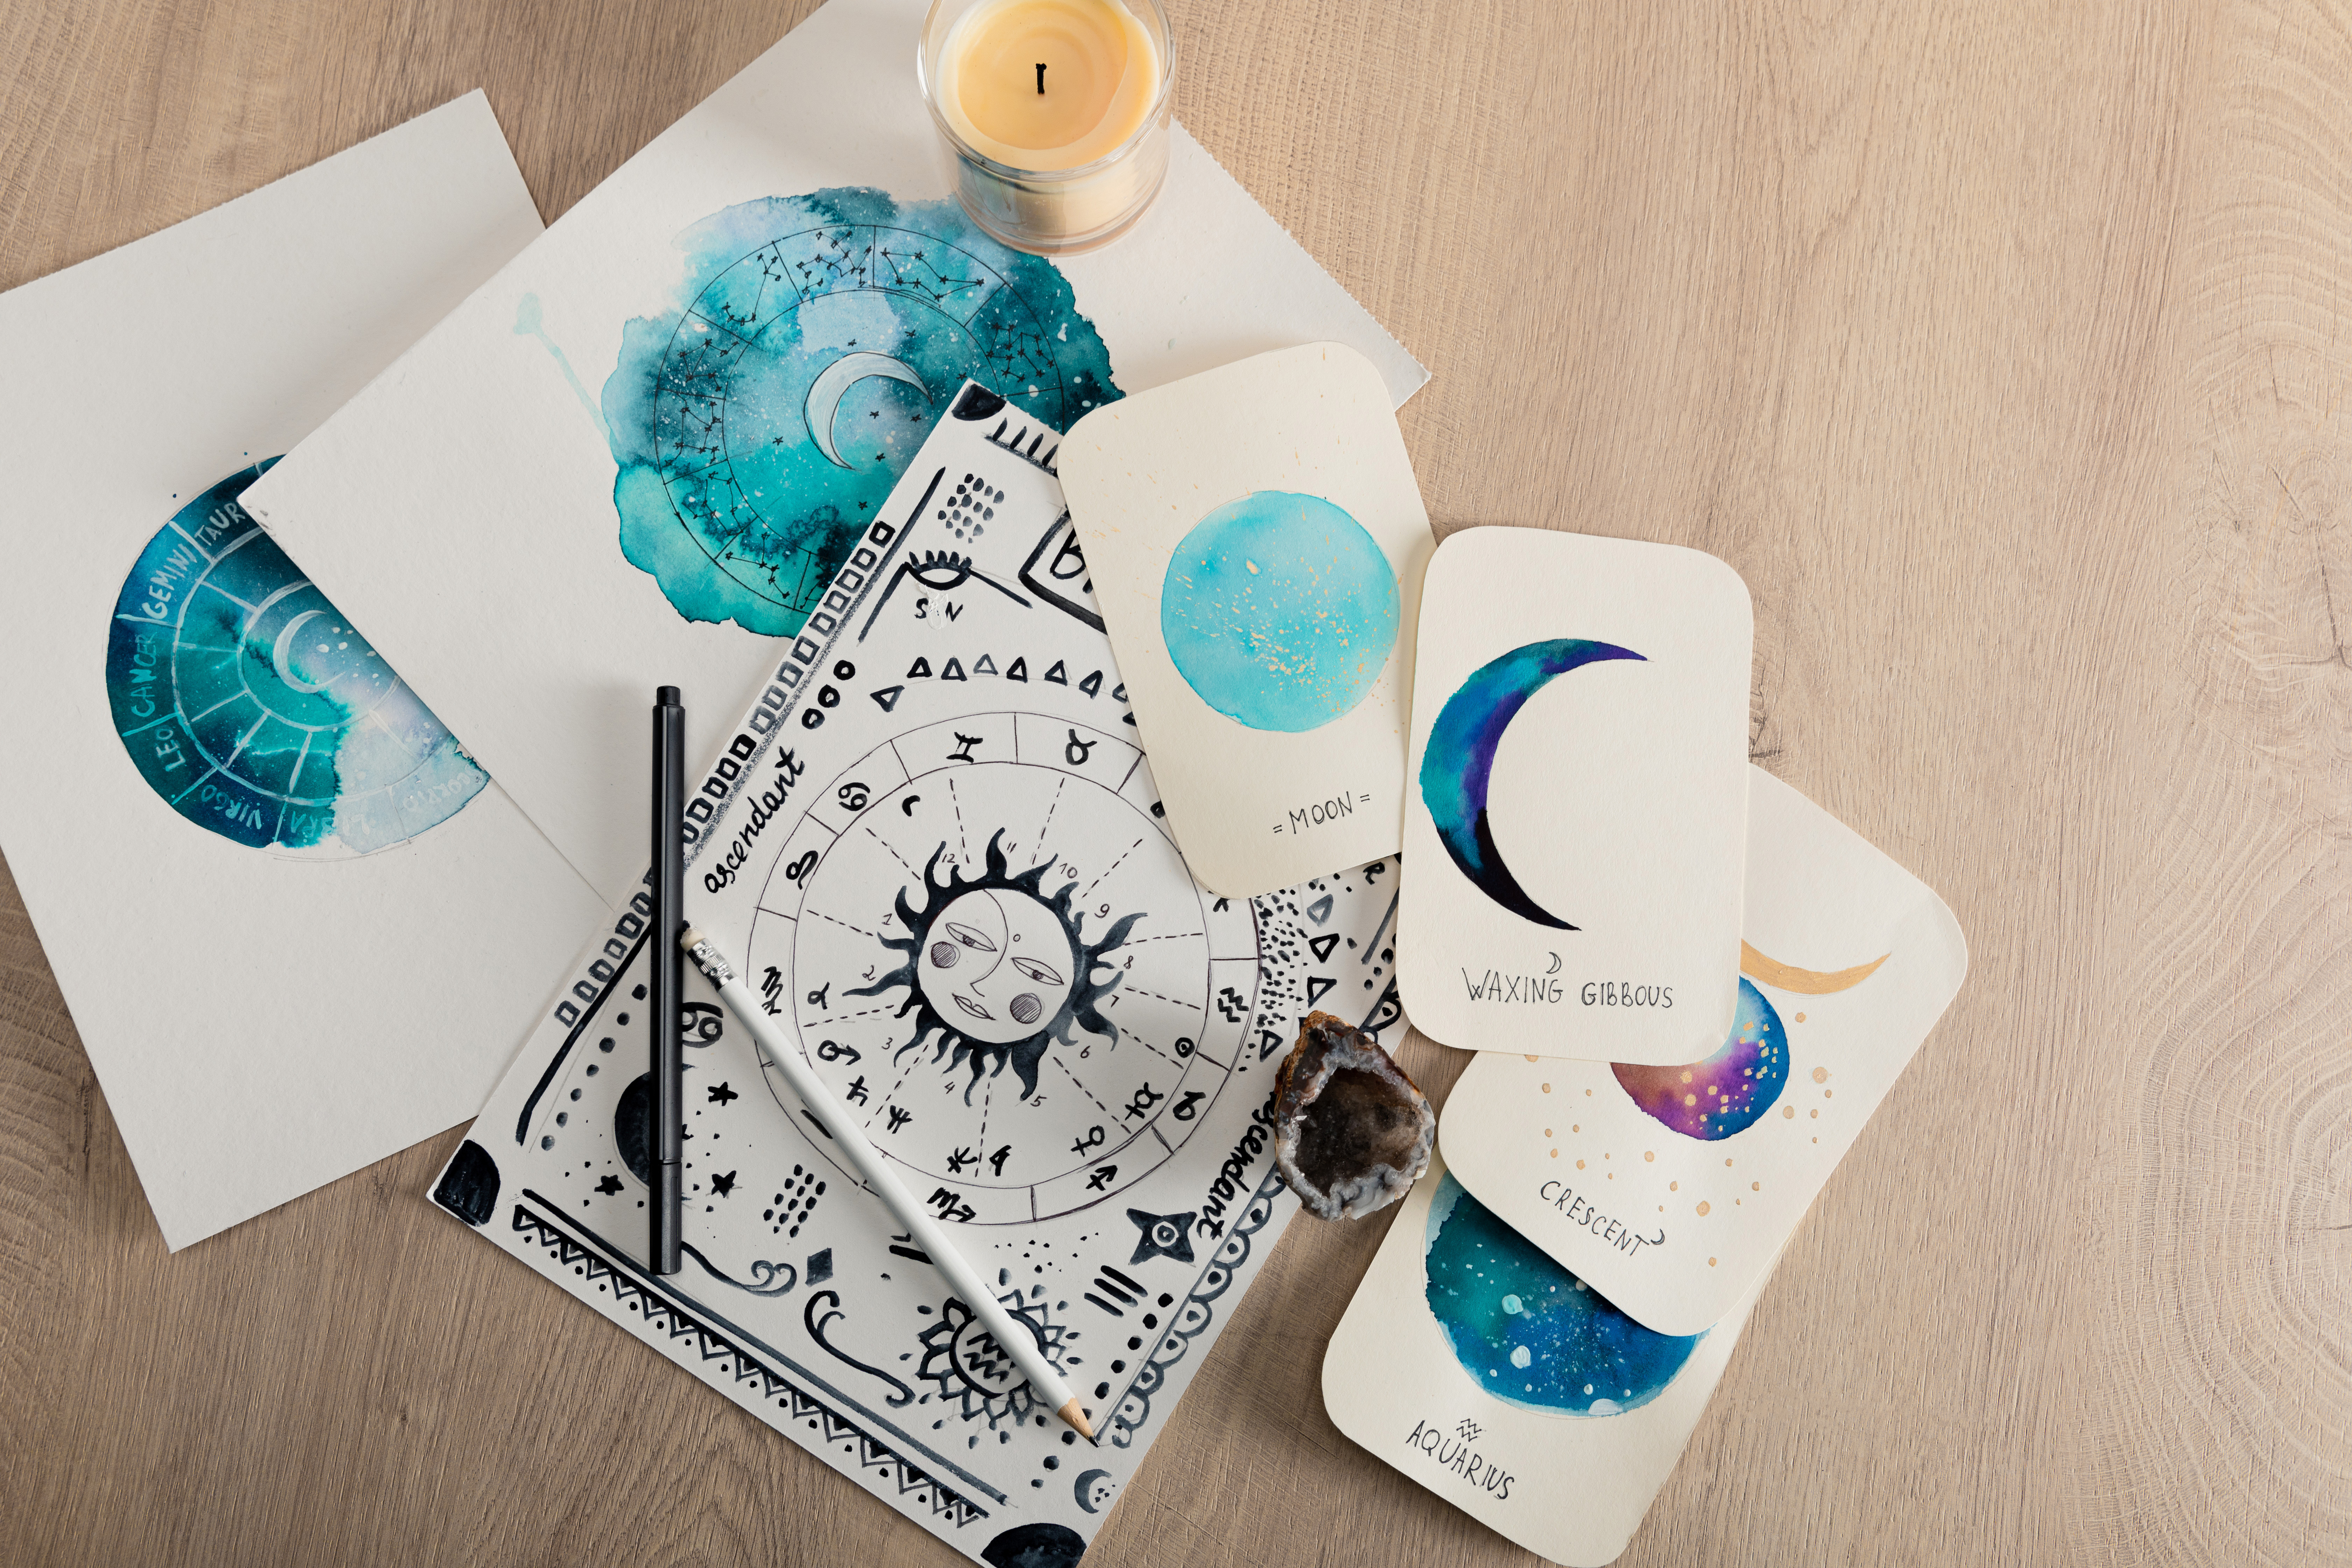 Top view of candle and cards with watercolor drawings of moon phases and zodiac signs on table